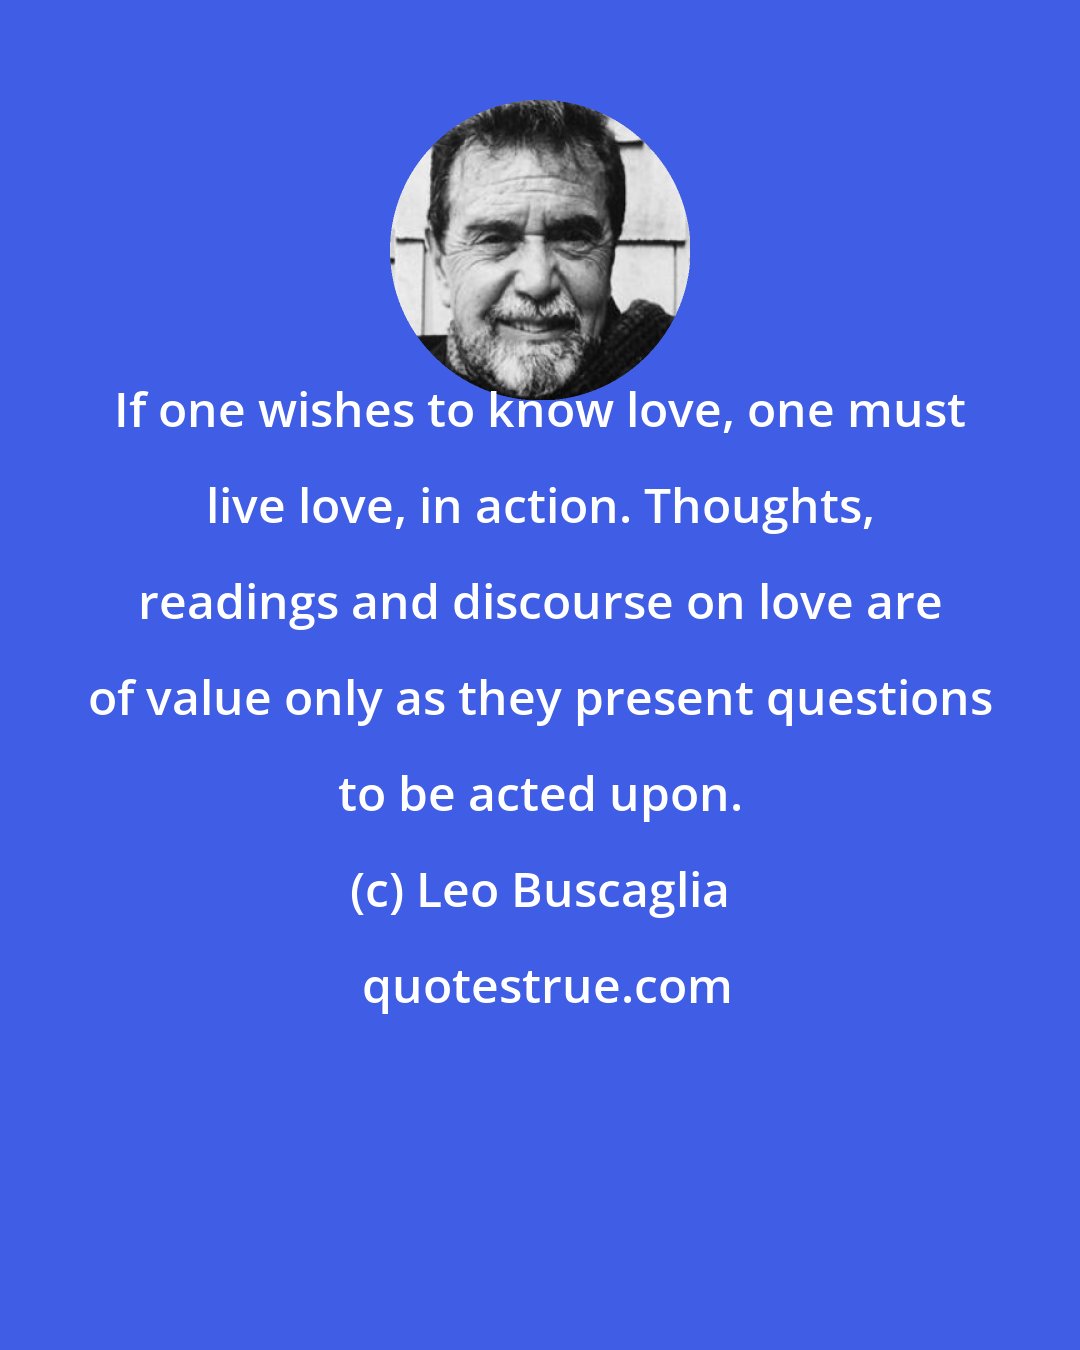 Leo Buscaglia: If one wishes to know love, one must live love, in action. Thoughts, readings and discourse on love are of value only as they present questions to be acted upon.